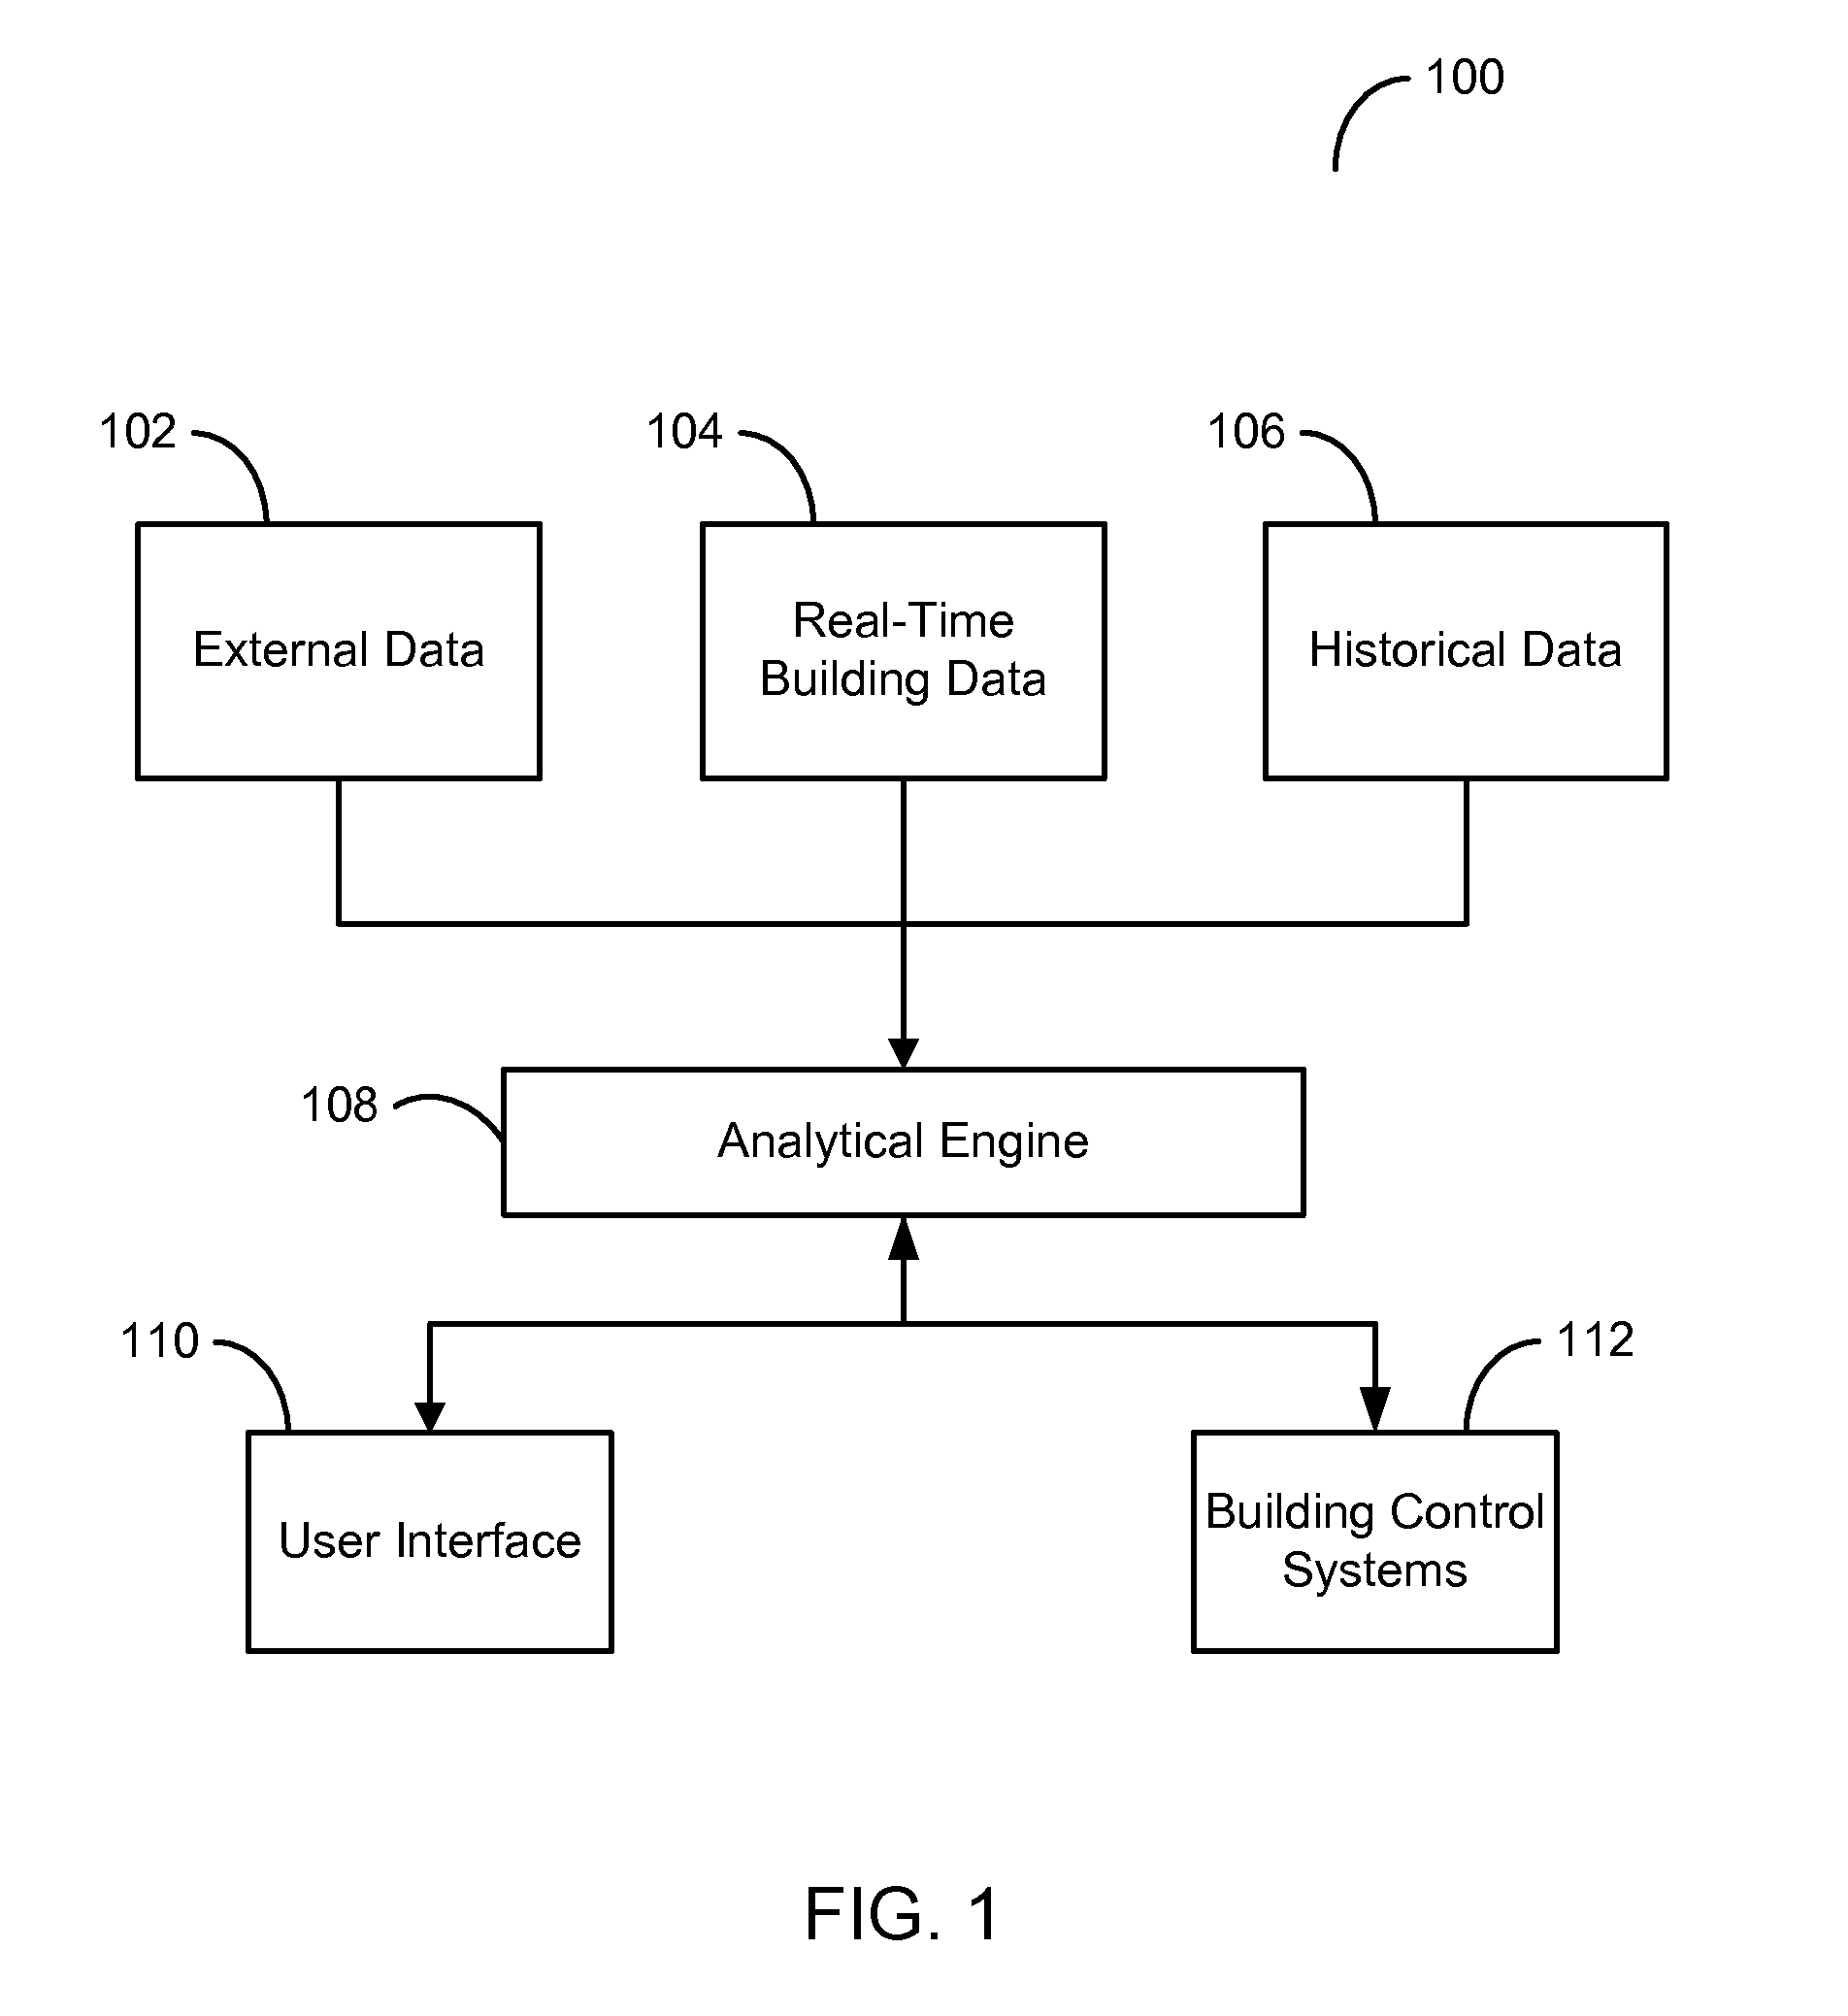 Systems and methods for optimizing energy and resource management for building systems